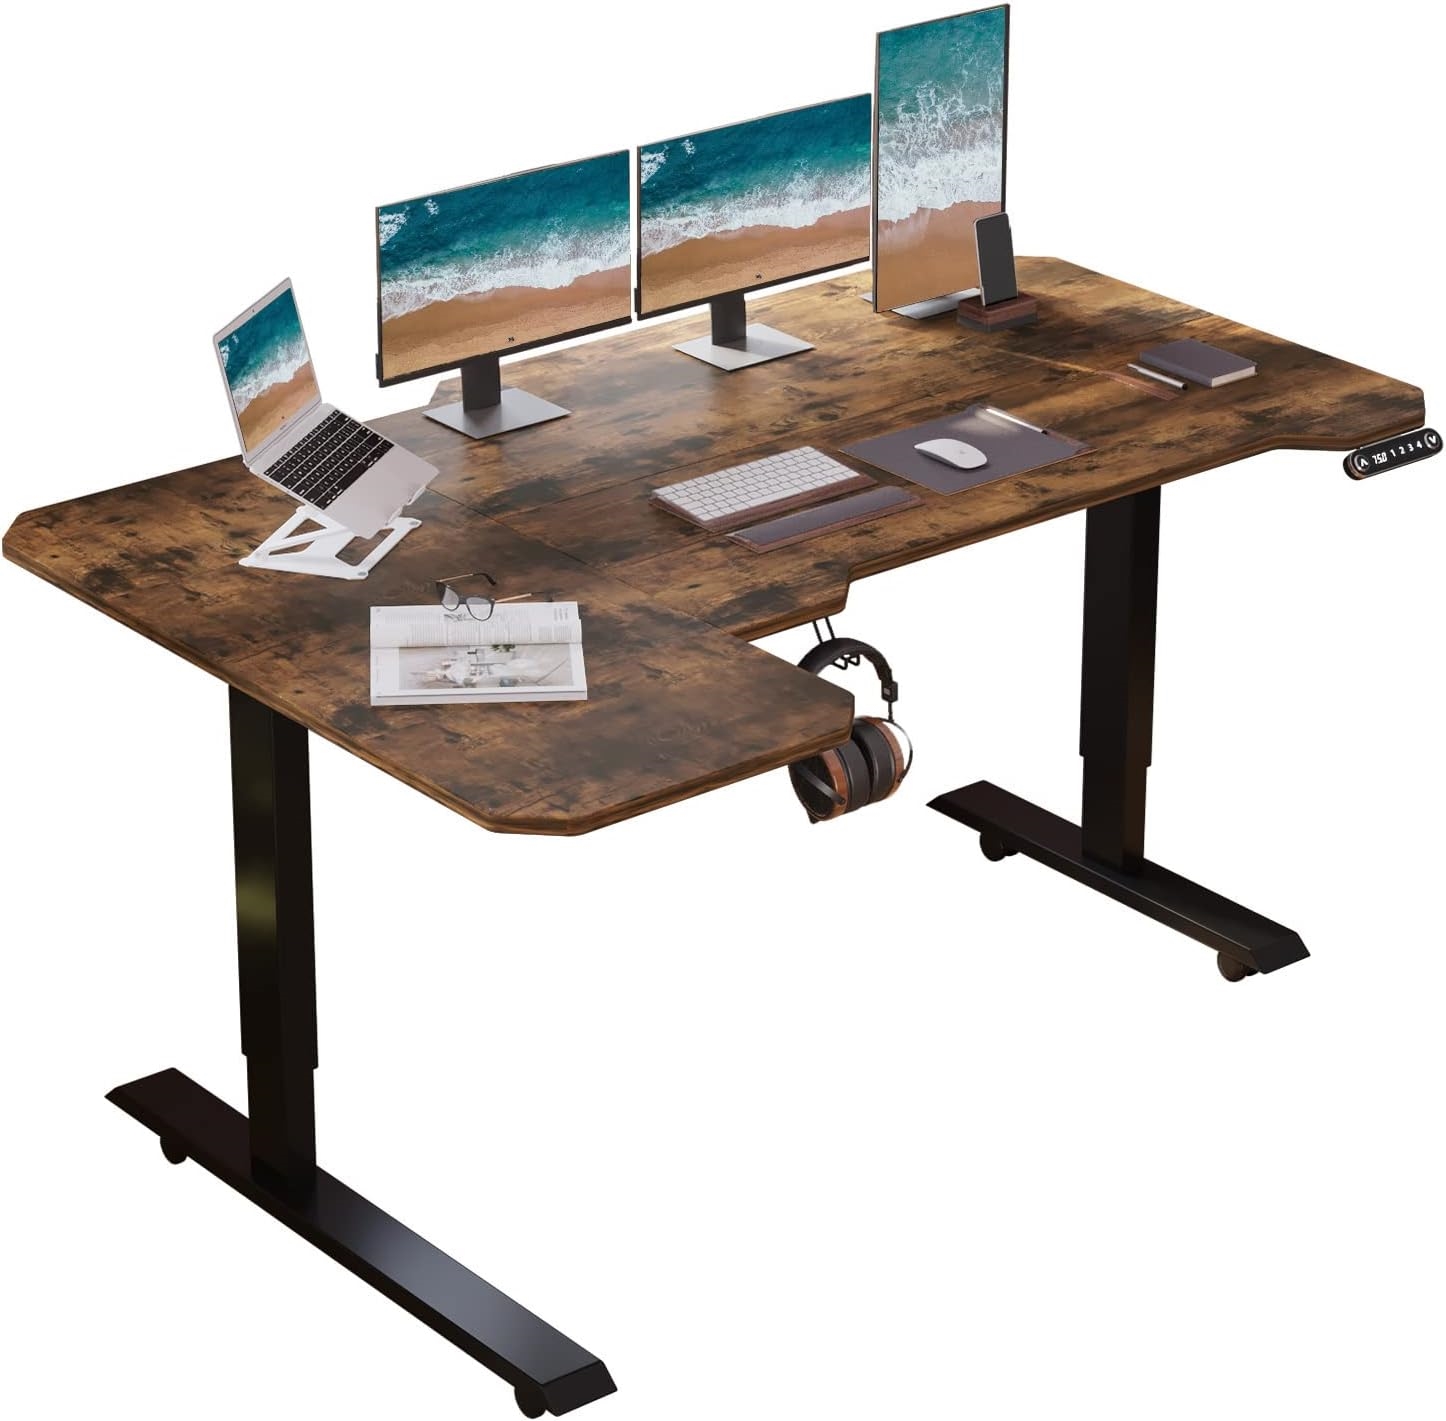 BUNOEM L-Shaped Electric Standing Desk | DeviceDaily.com